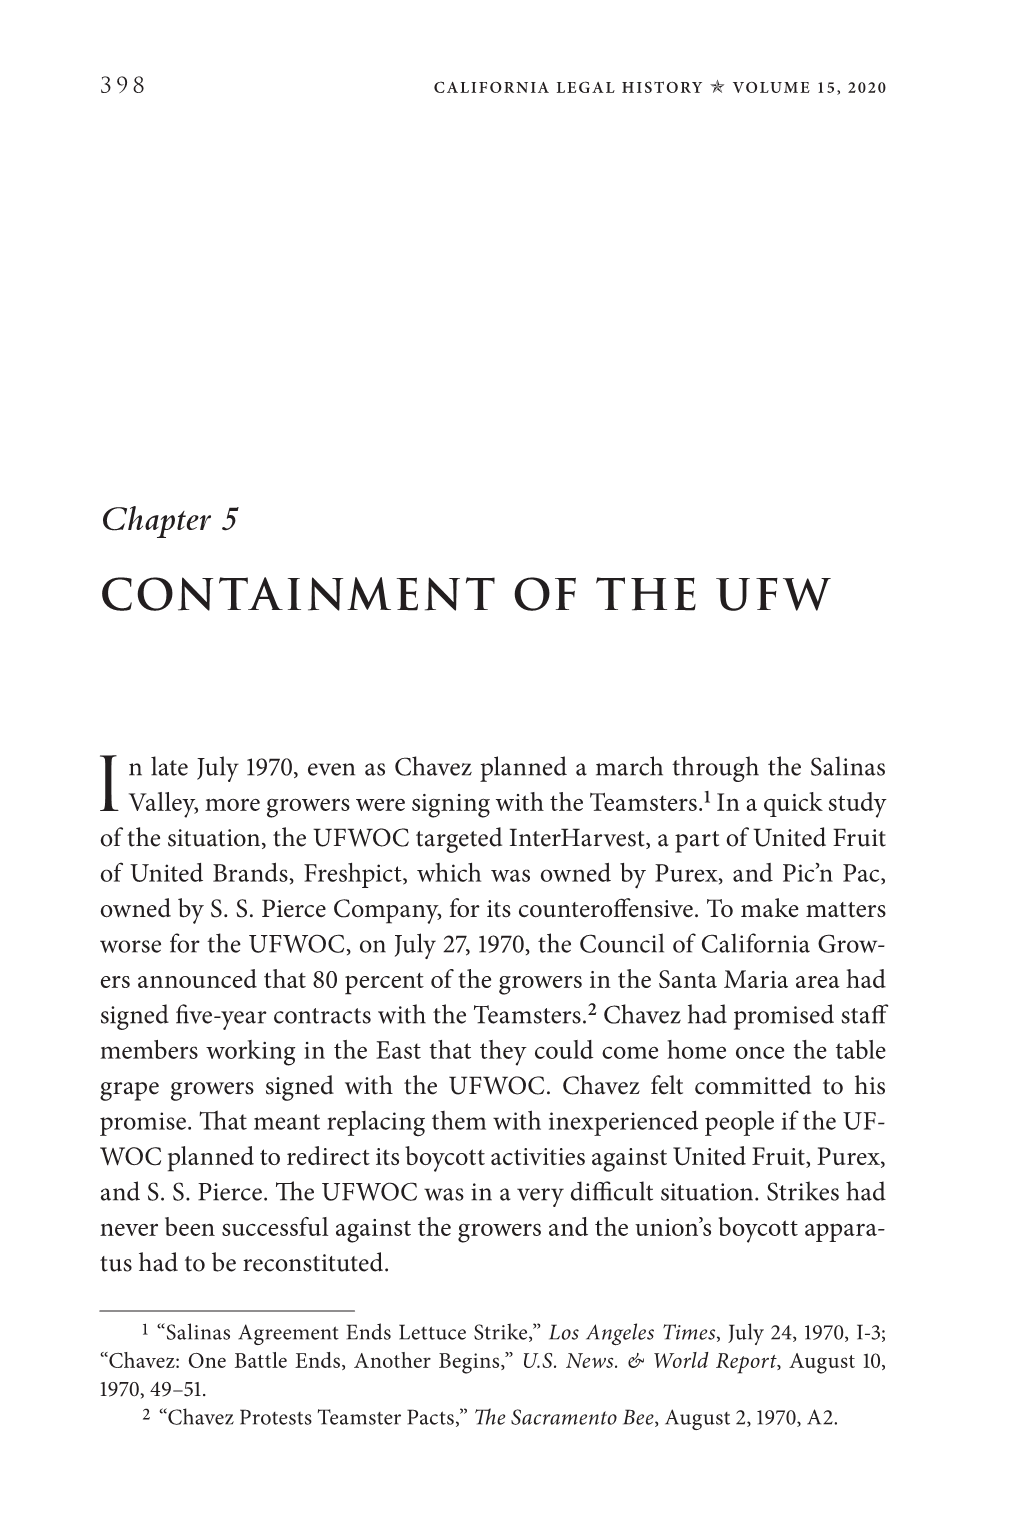 Containment of the Ufw